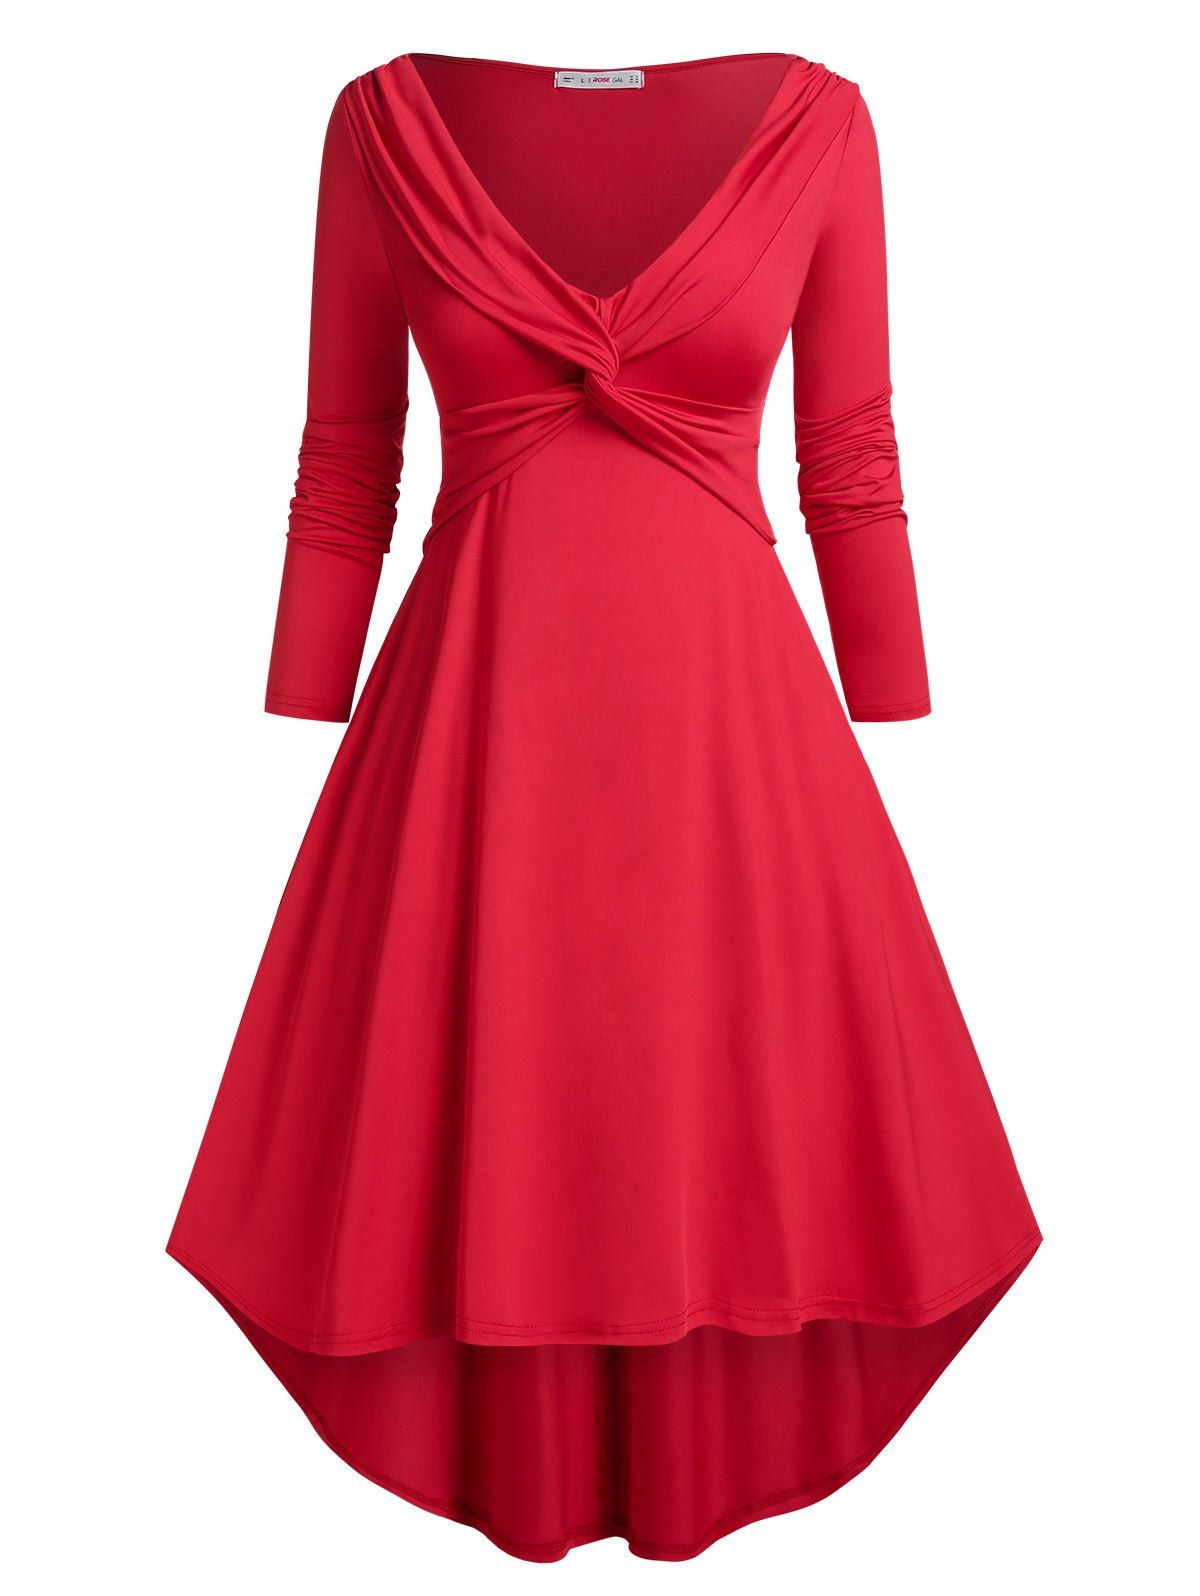 Plus Size Twisted High Low Cocktail Dress - RED 4X